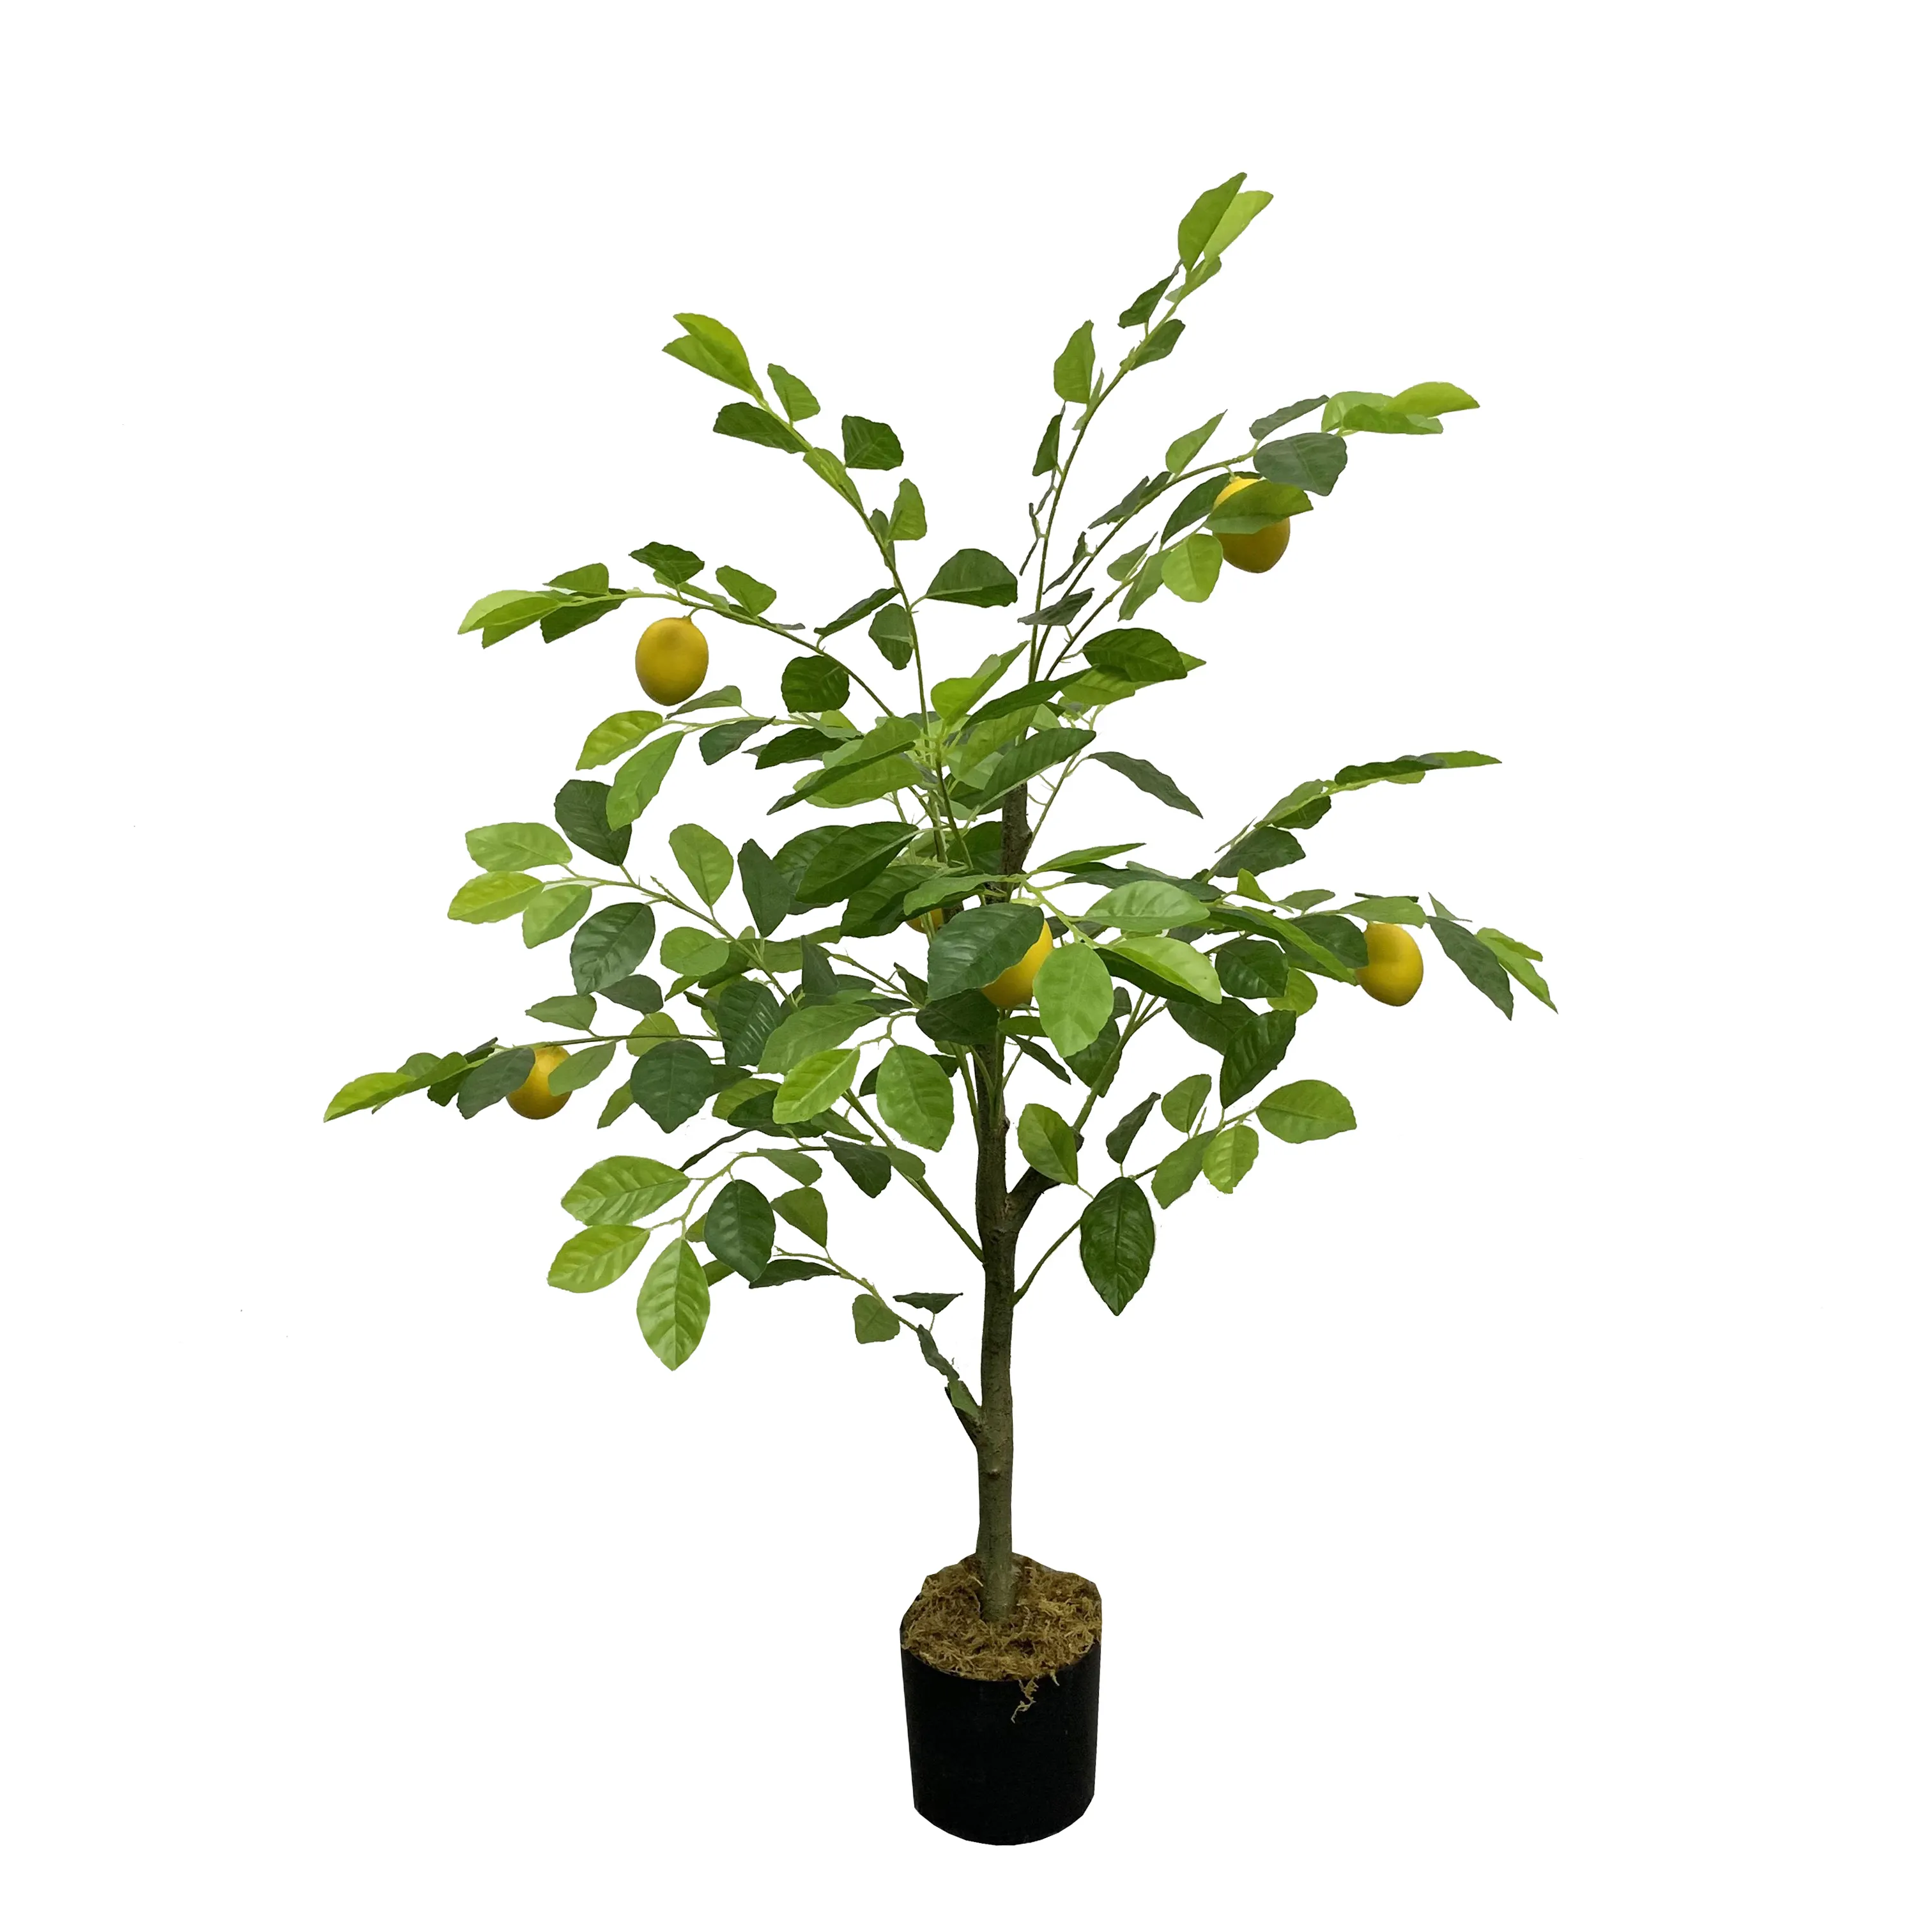 Faux Green Plant Potted Indoor Living Room Decoration Fruit Bonsai Customized Available Faux Lemon Tree -149